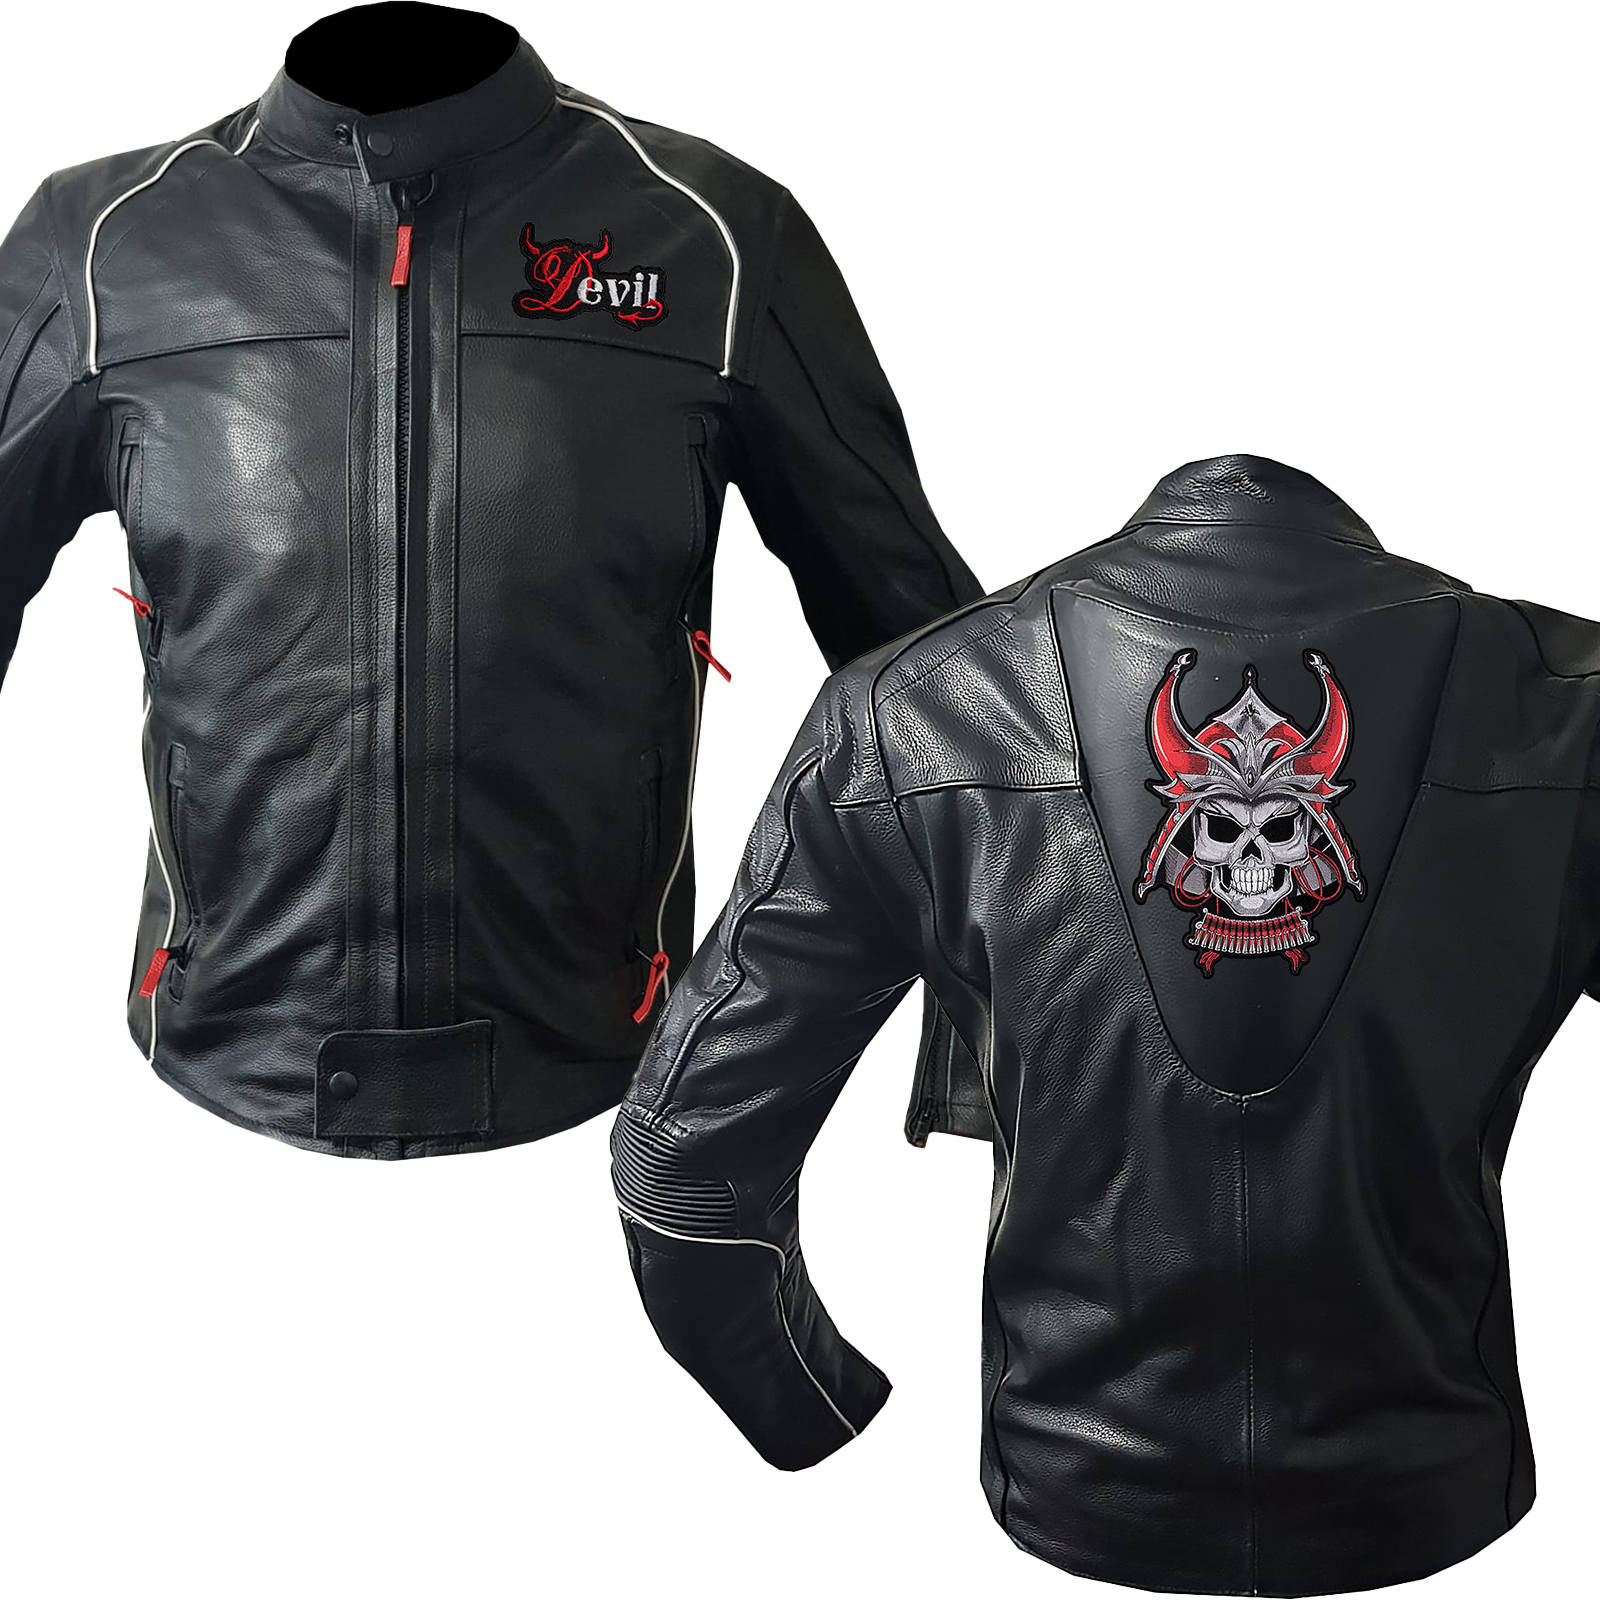 Fiery Edge: Devilishly Stylish Leather Jacket Graphic. Protective Cowhide Gear - $219.99